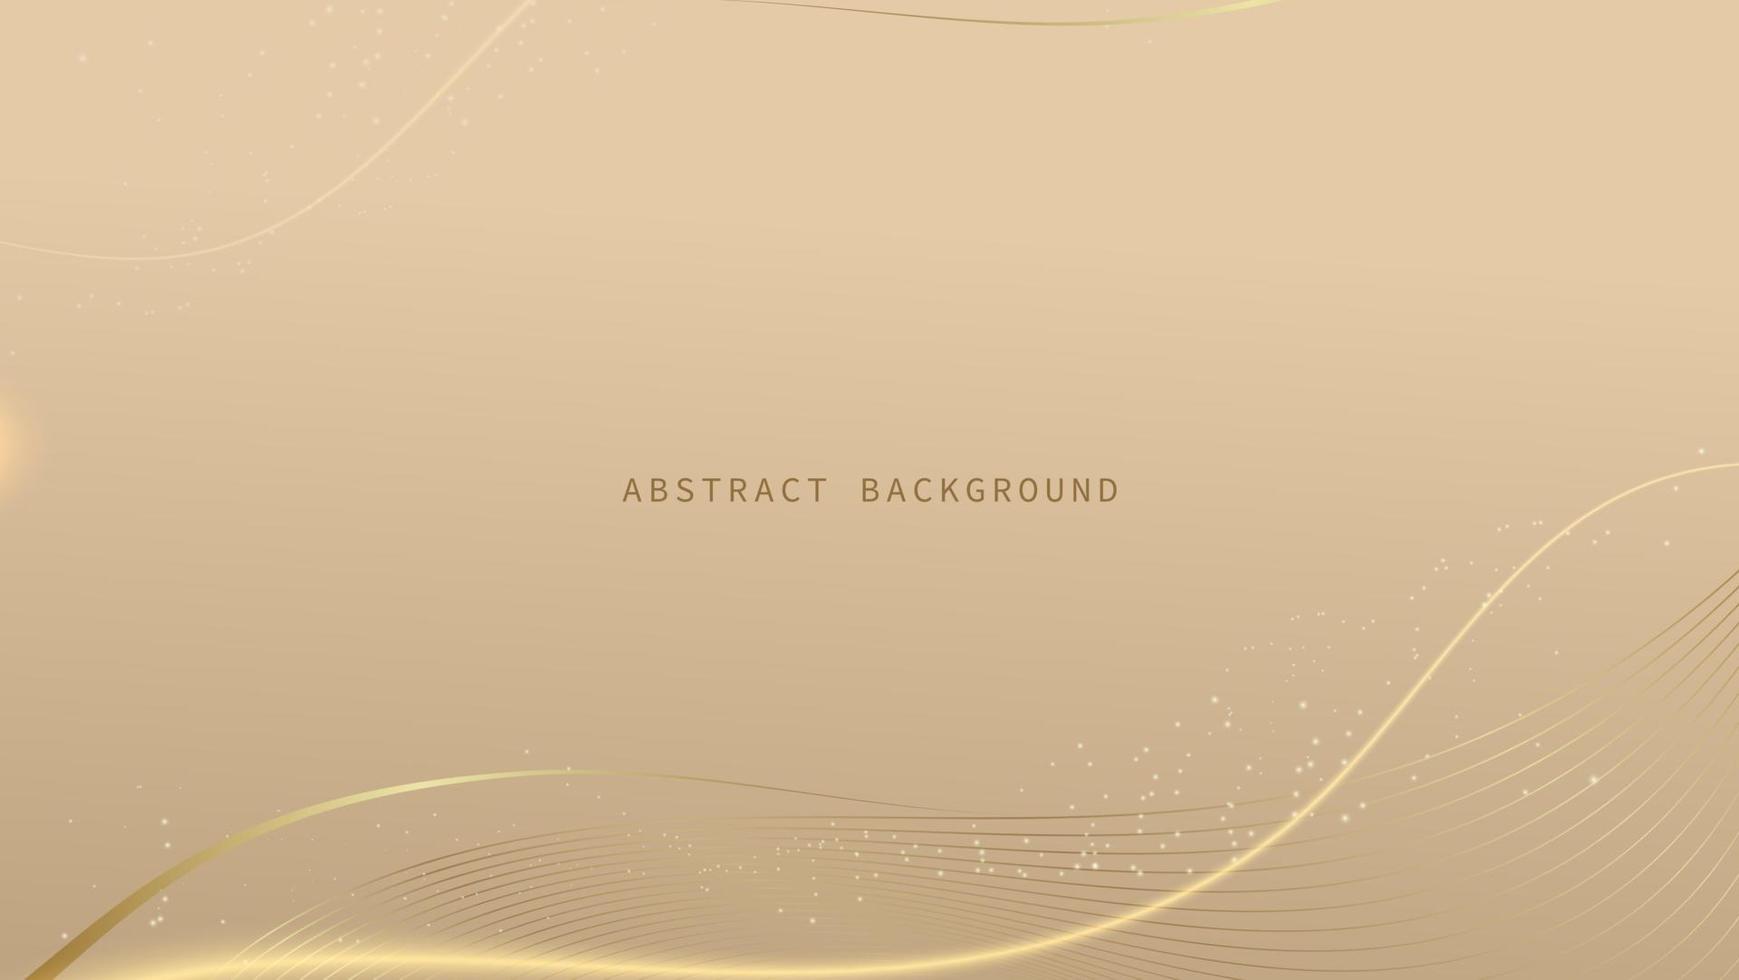 Modern luxury abstract background with golden line elements glowing pattern. Elegant curve geometric shapes on gold background. Vector illustration for design